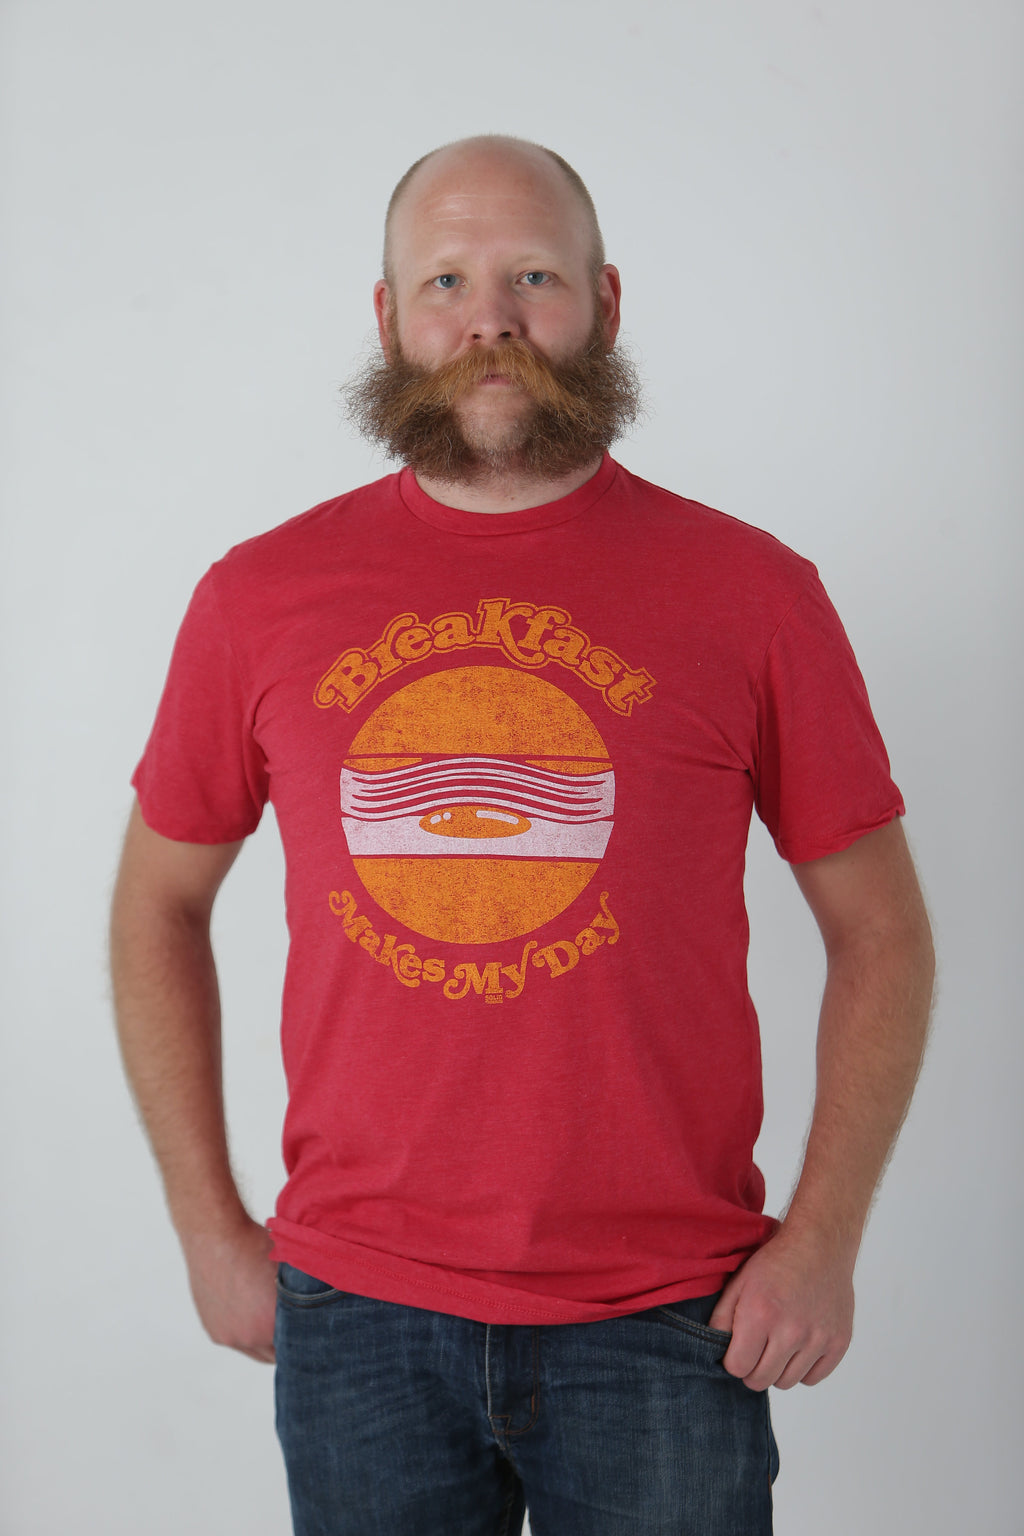 Breakfast Makes My Day T-Shirt - Tractor Beam Apparel